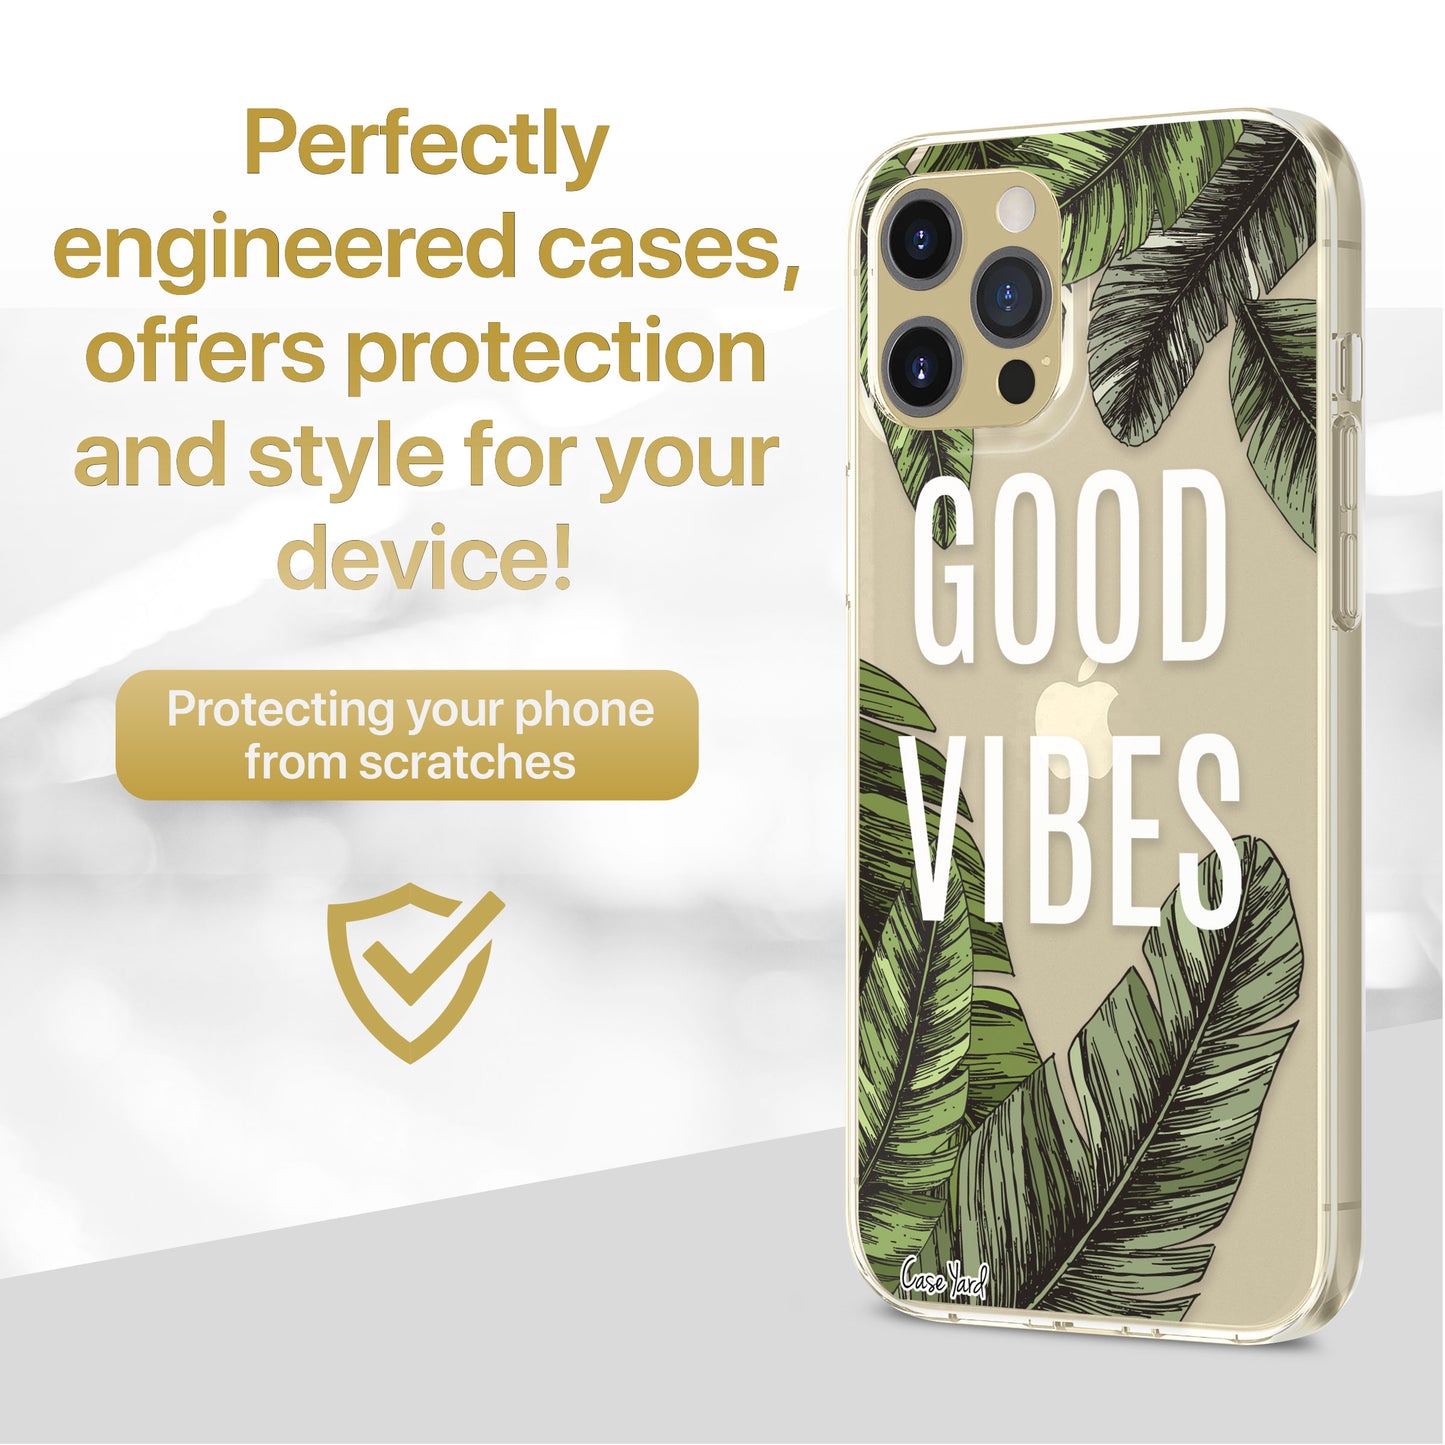 TPU Clear case with (Good Vibes) Design for iPhone & Samsung Phones